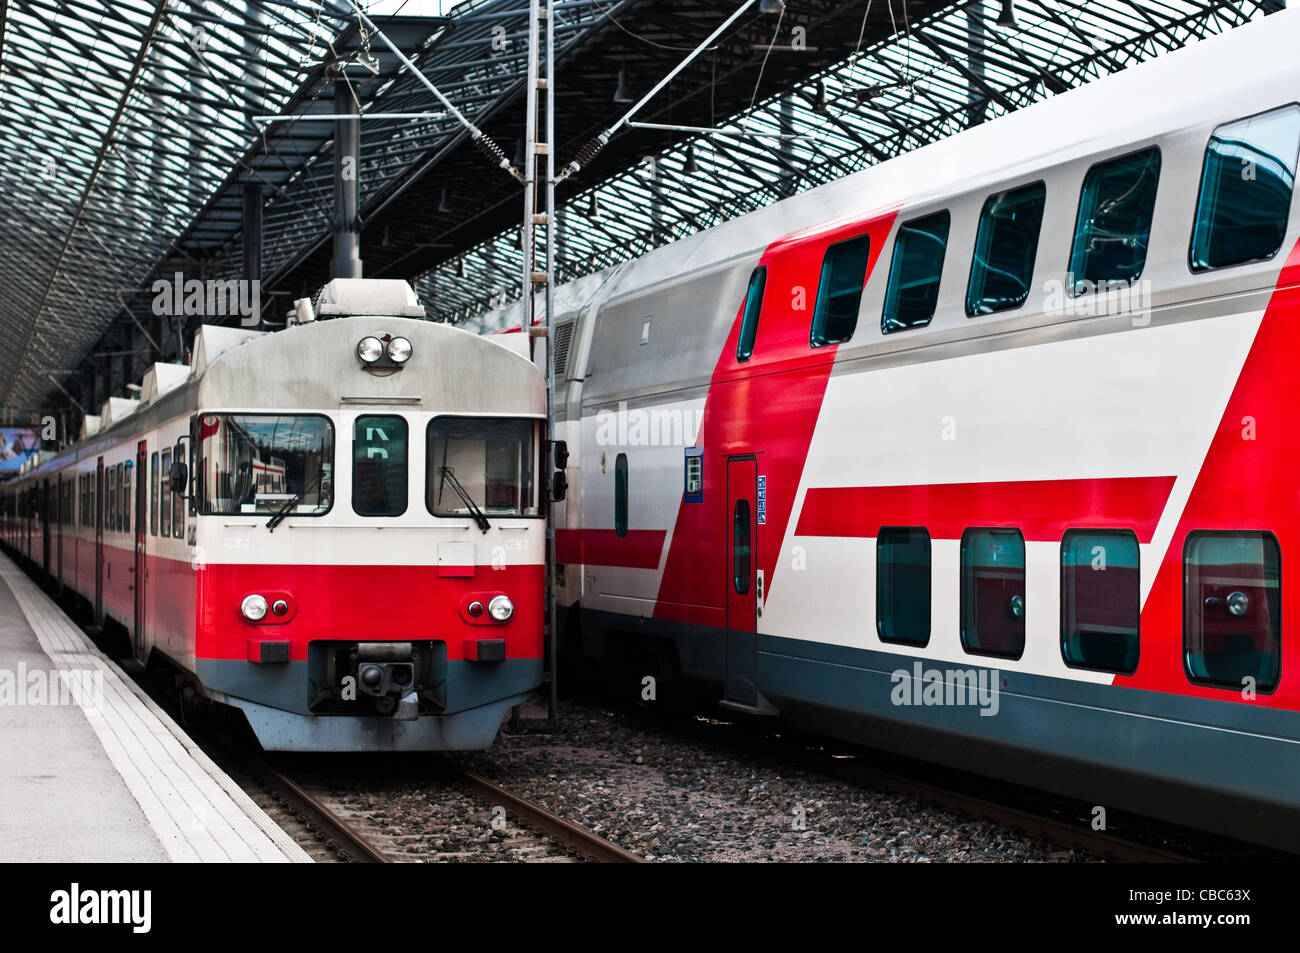 two trains in white and red color, one new and one old model at train station in Helsinki, Finland Stock Photo